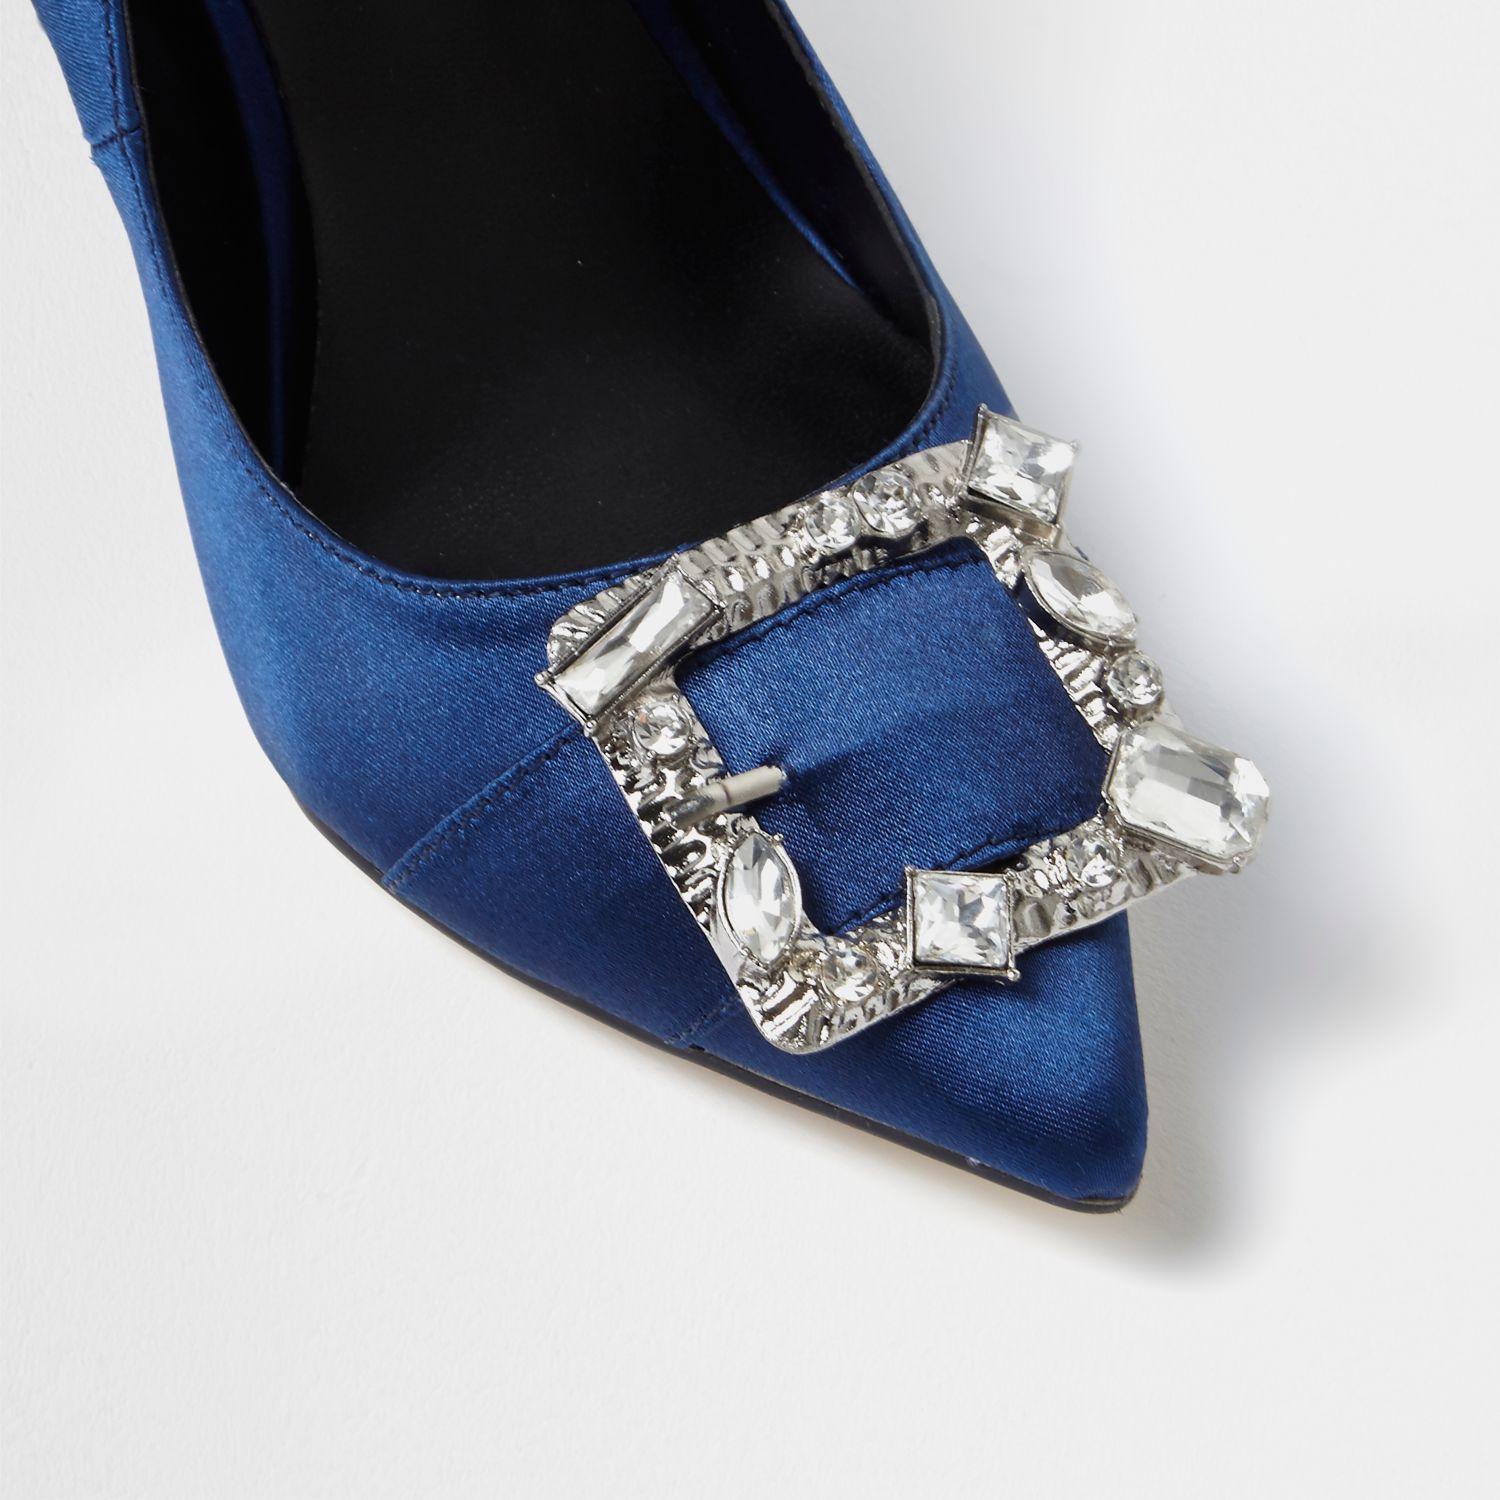 River Island Navy Satin Diamante Buckle Court Shoes in Blue - Lyst